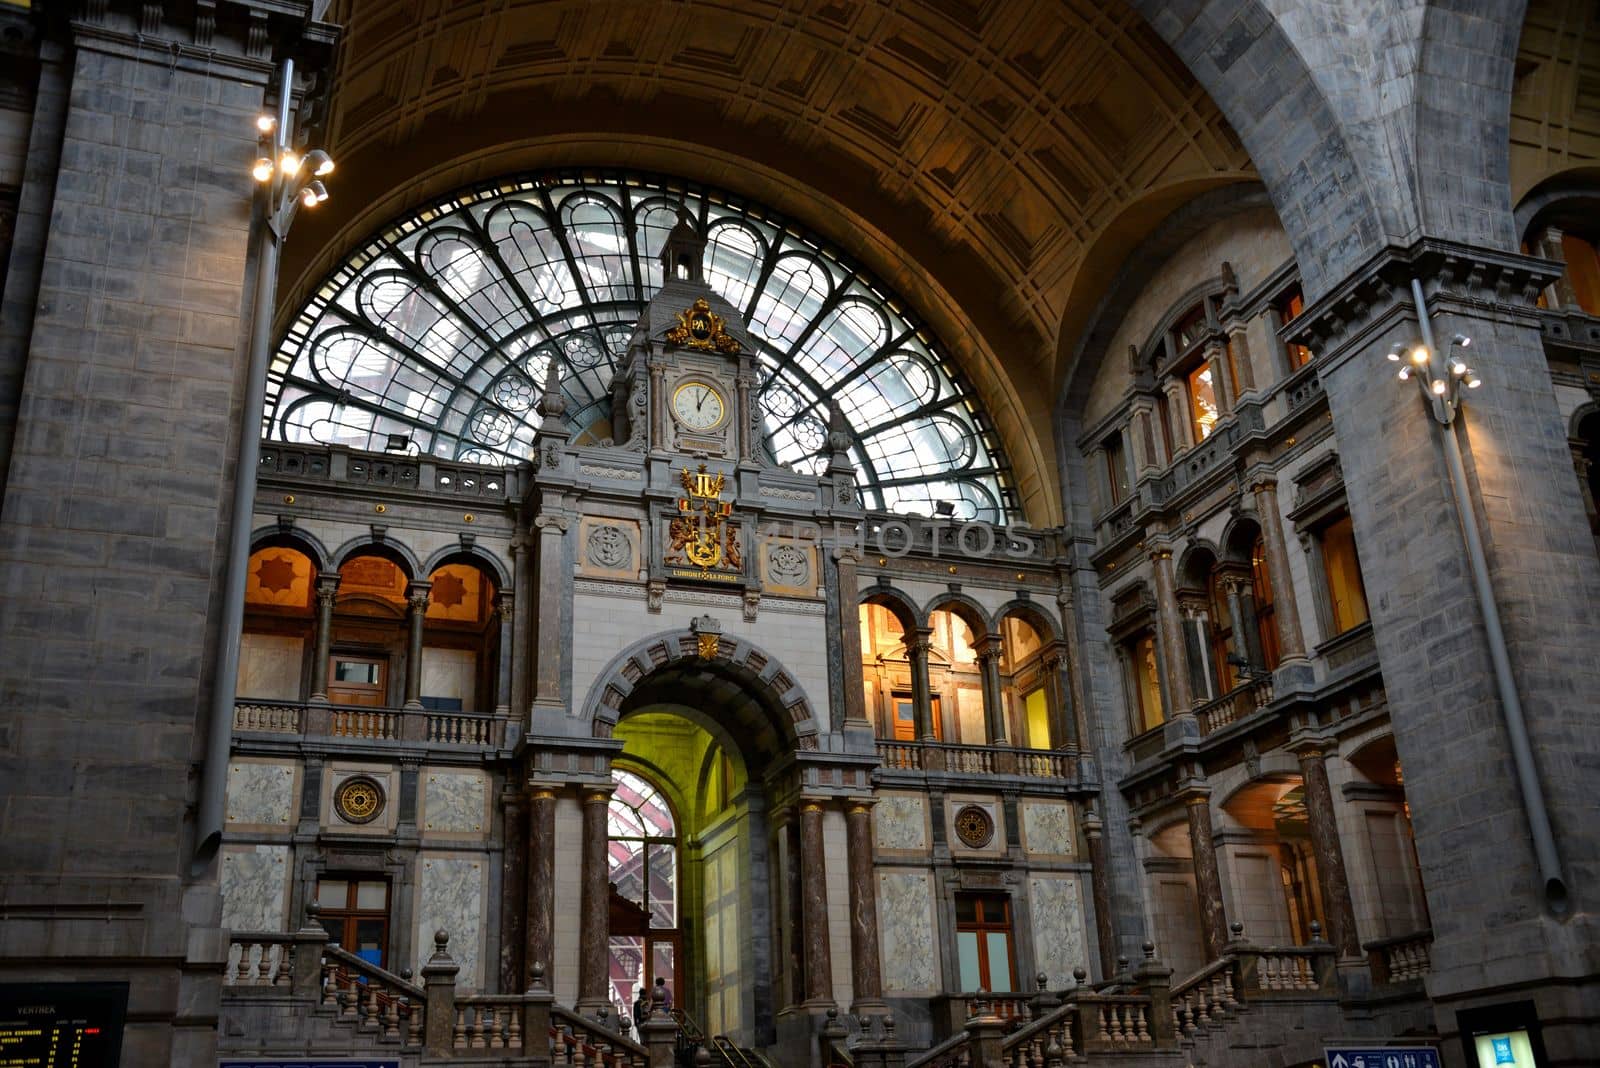 The inside of the Railway station of Antwerp.